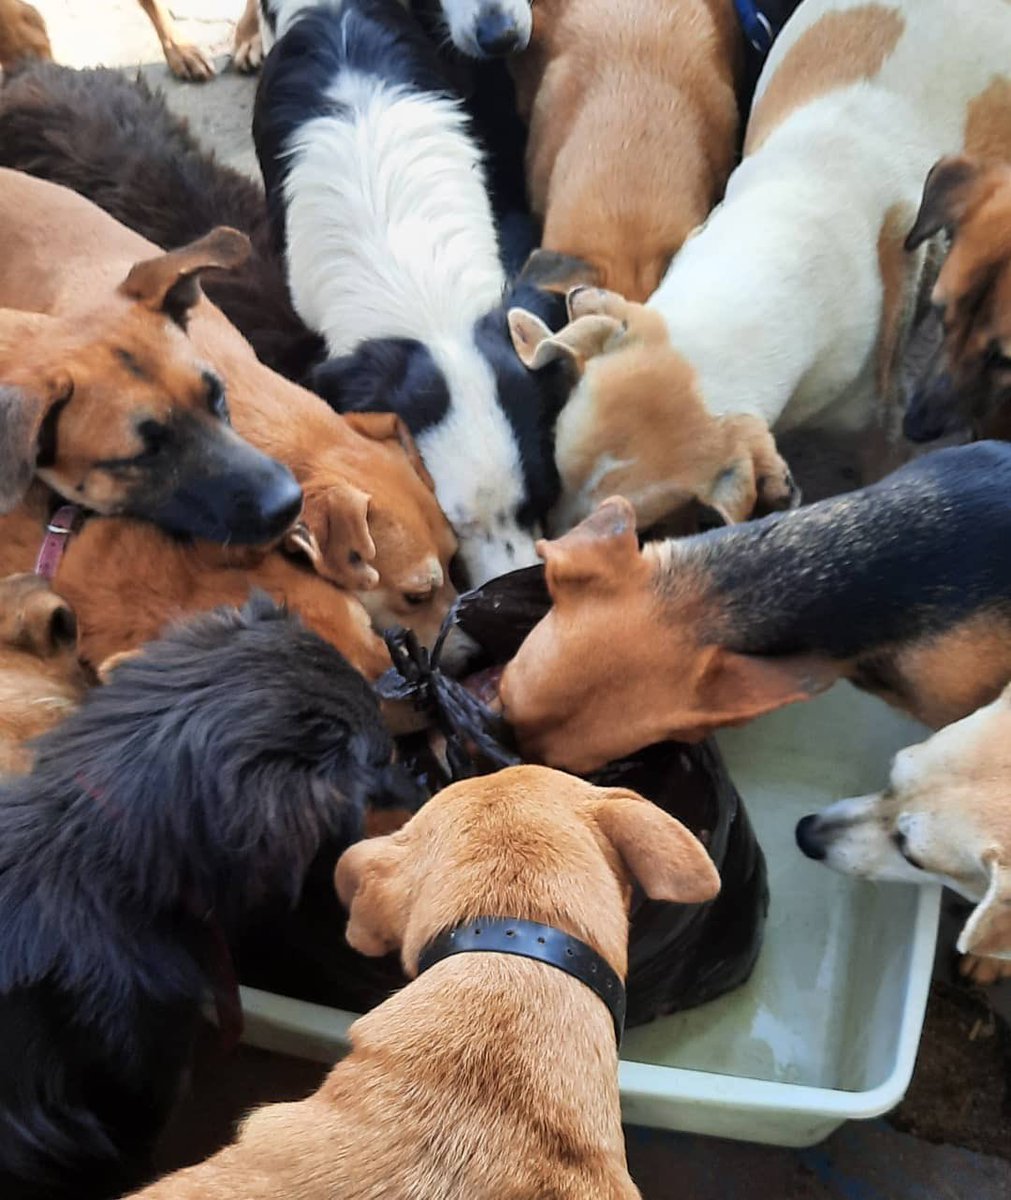 🆘 FOOD 🆘🥩🐕 Please, if you could give us the opportunity to feed 108 dogs 🥩🍗🦴 it is not easy, around $430.00 is needed 🍗🍖 for their food, it contains chopped rice, meat, biscuits and vitamins, dewormers PLEASE HELP #pledge #RESCUE 🙏🏽🐕🆘 PAYPAL ⬇️ paypal.me/VetRescuinghea…